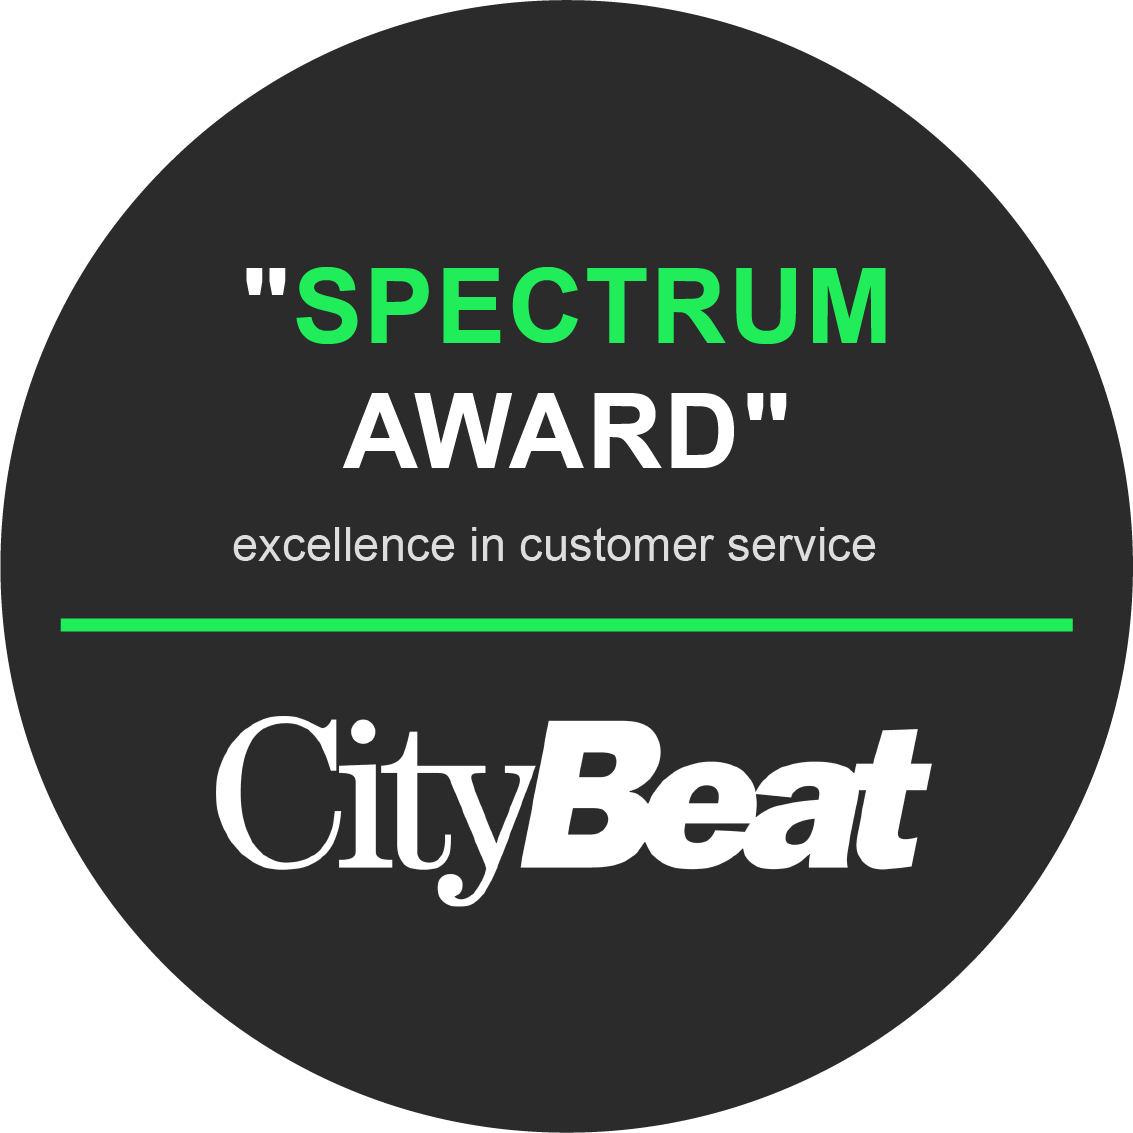 "Spectrum Award" Excellence in Customer Service by City Beat